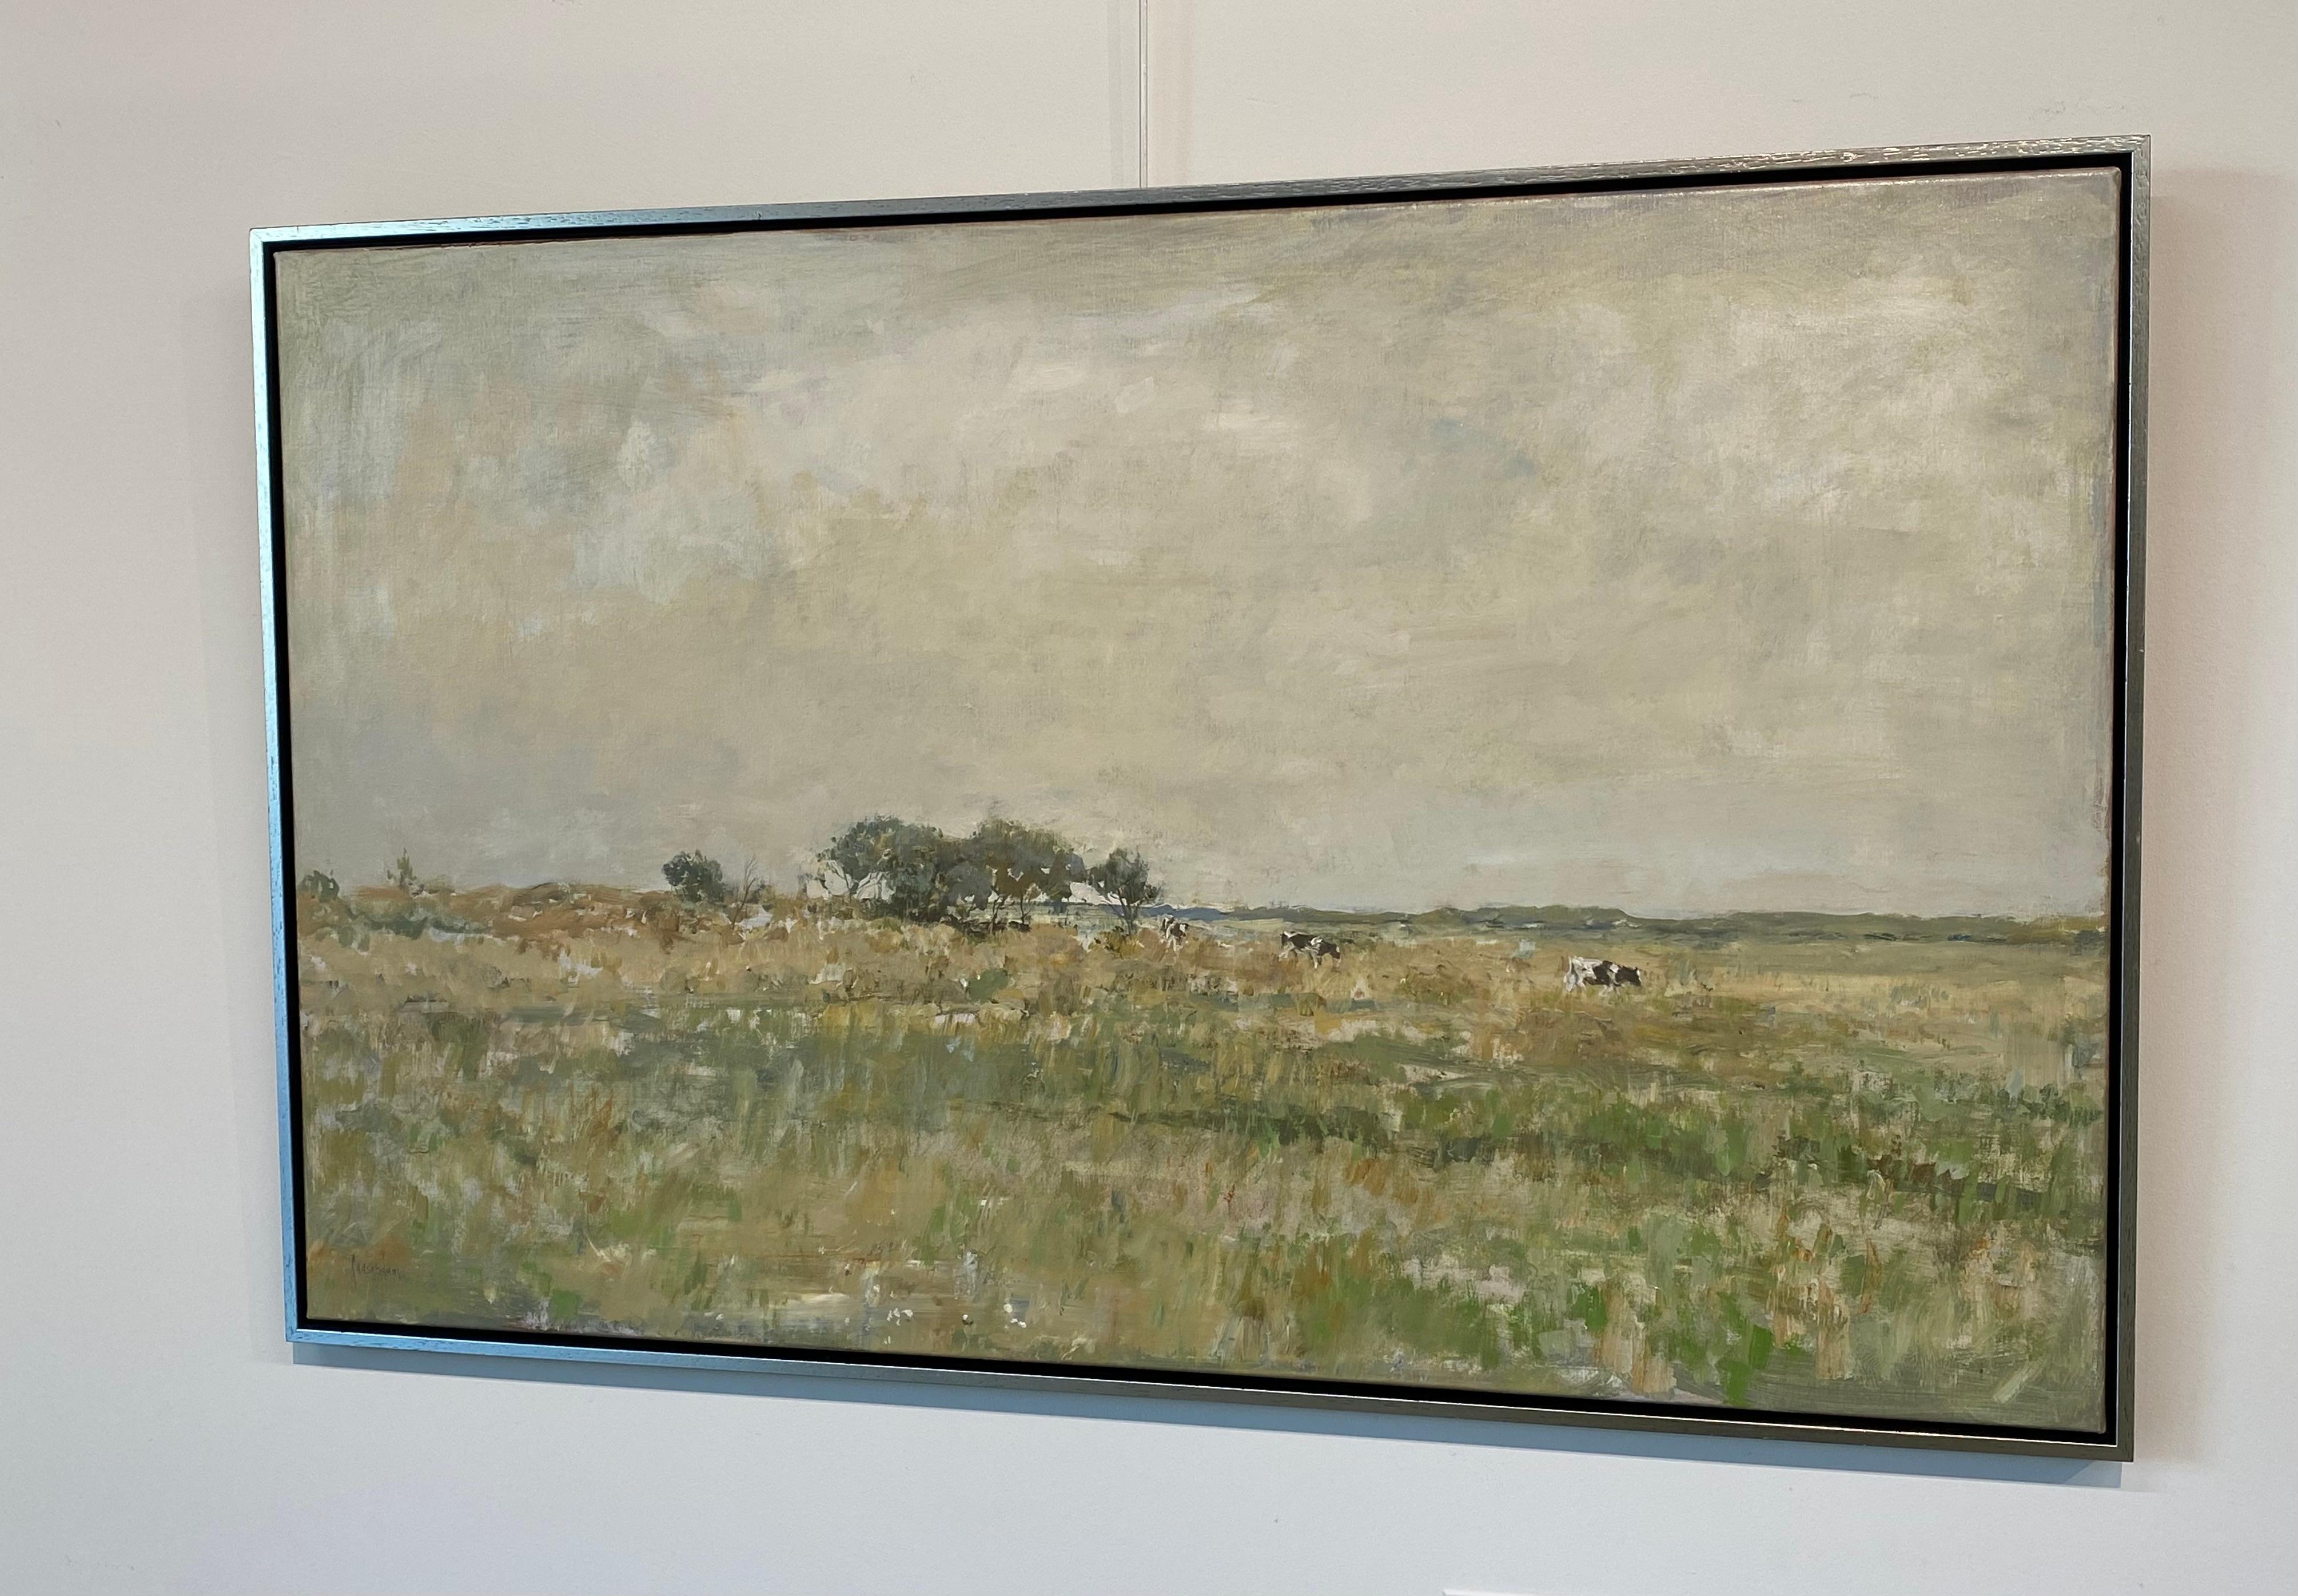 Flip Gaasendam
Dutch Cows on the Salt Marsh
75 x 120 cm
Oil on Canvas
This painting is framed (included in price) 80 x 125 cm

This painting is made by Flip Gaasendam. 
An important member of the 'Dutch Northern Figurative Painters' .   

His